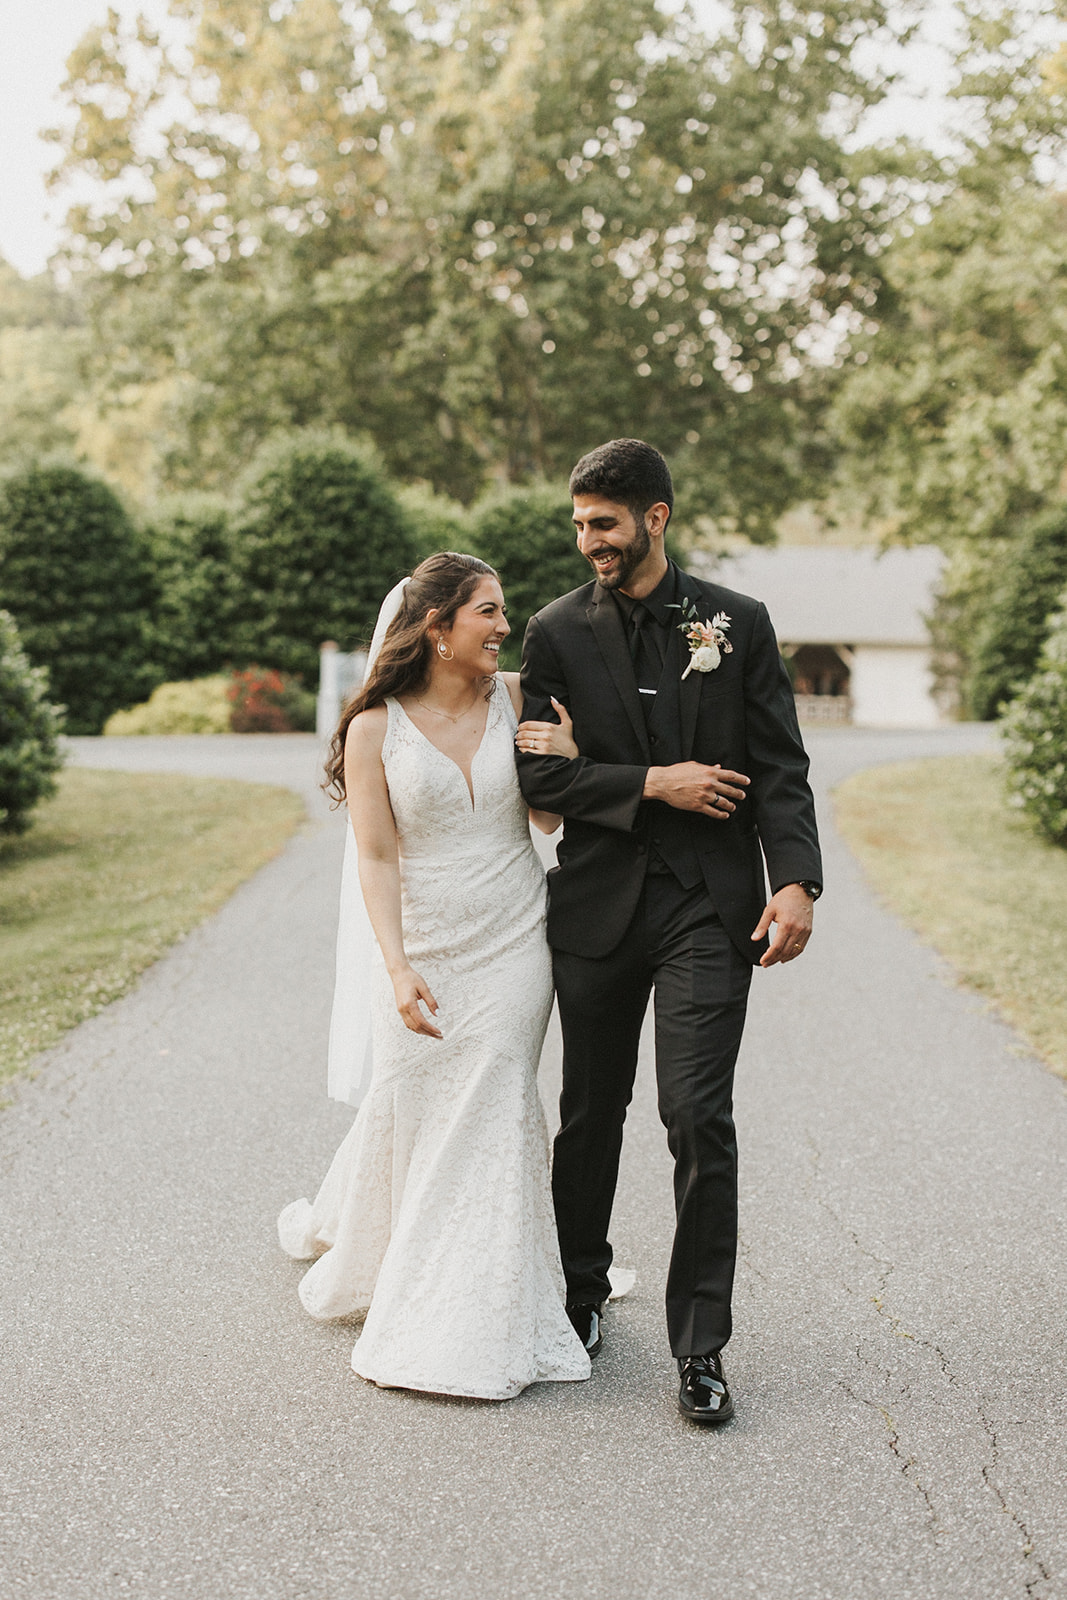 A romantic, classical Southern wedding at the Vesuvius Vineyards in Iron Station, NC